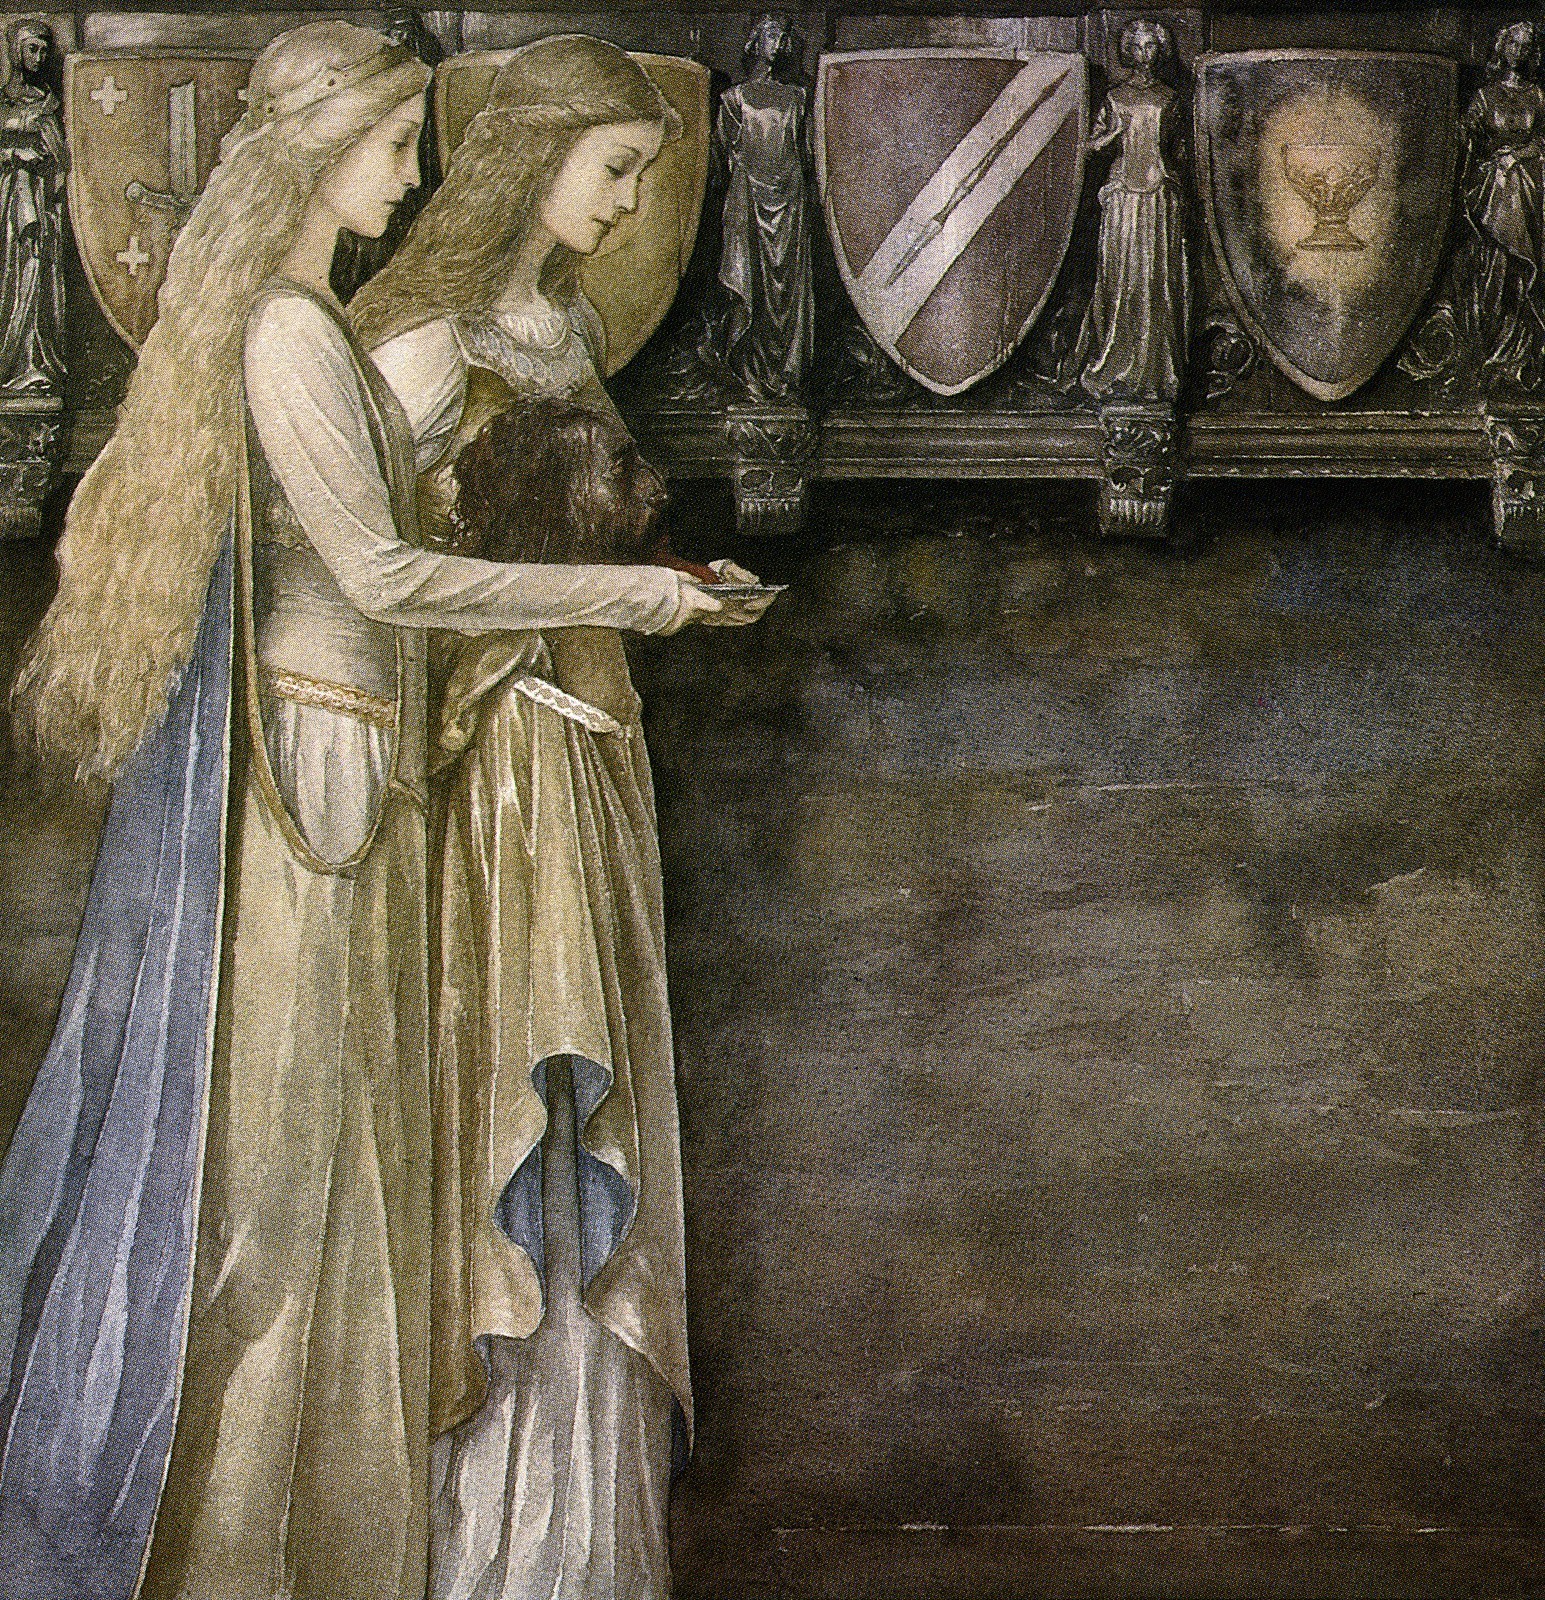 Wallpaper, painting, long hair, sculpture, shield, medieval, Alan Lee, The Mabinogion, ART, ancient history, middle ages 1545x1600